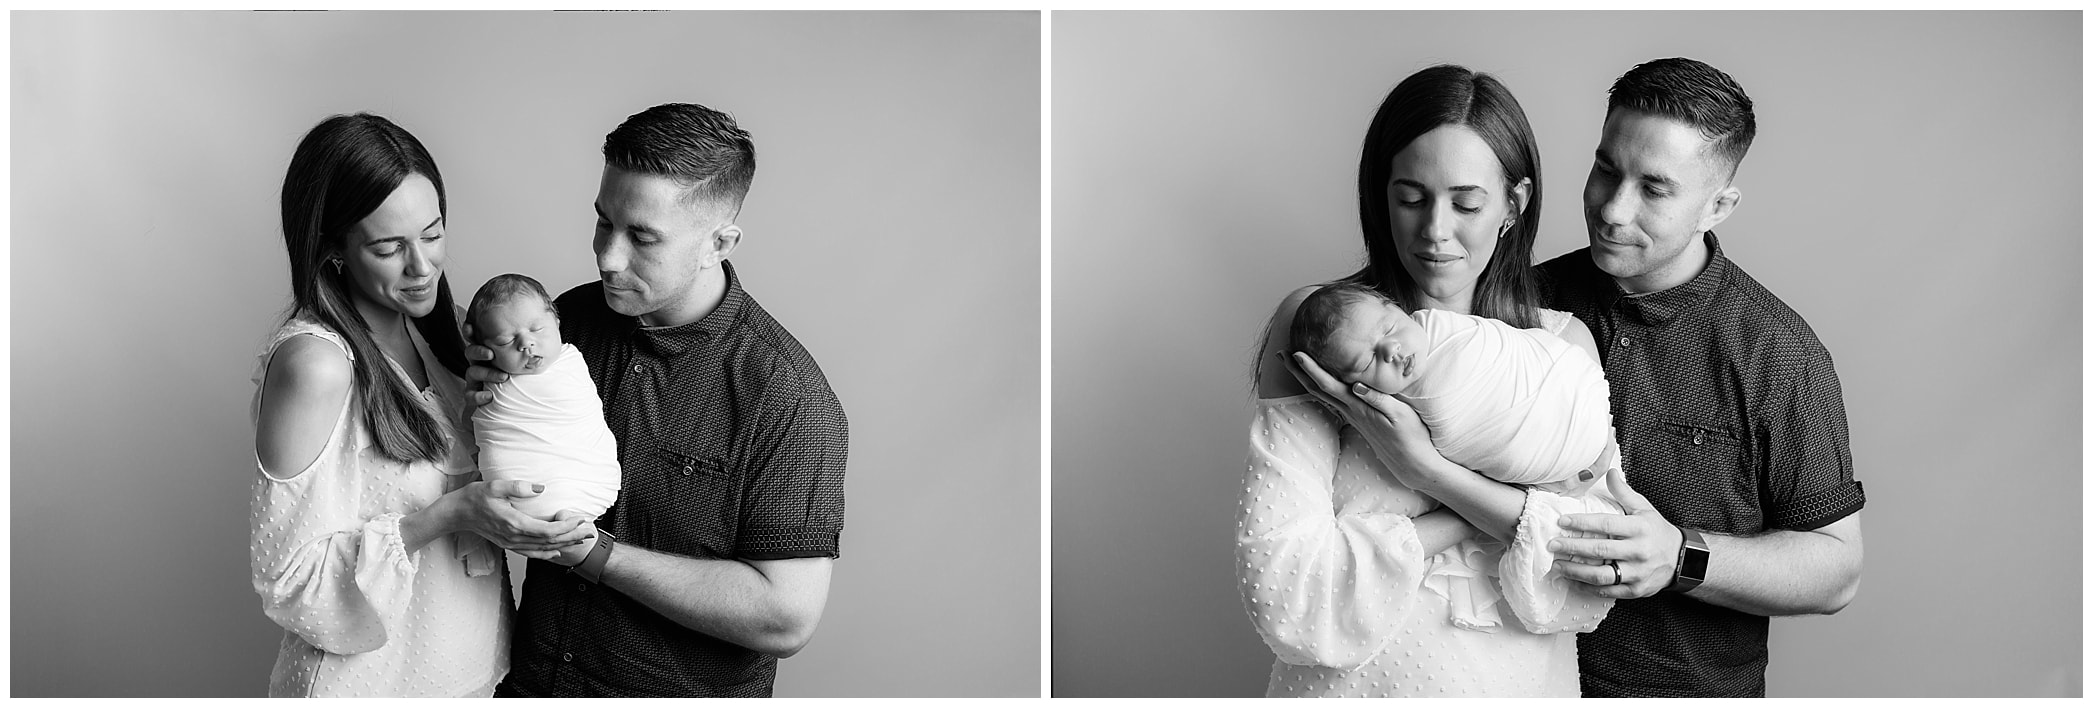 Black and White Parent Images with newborn by Lynne Harper Photography